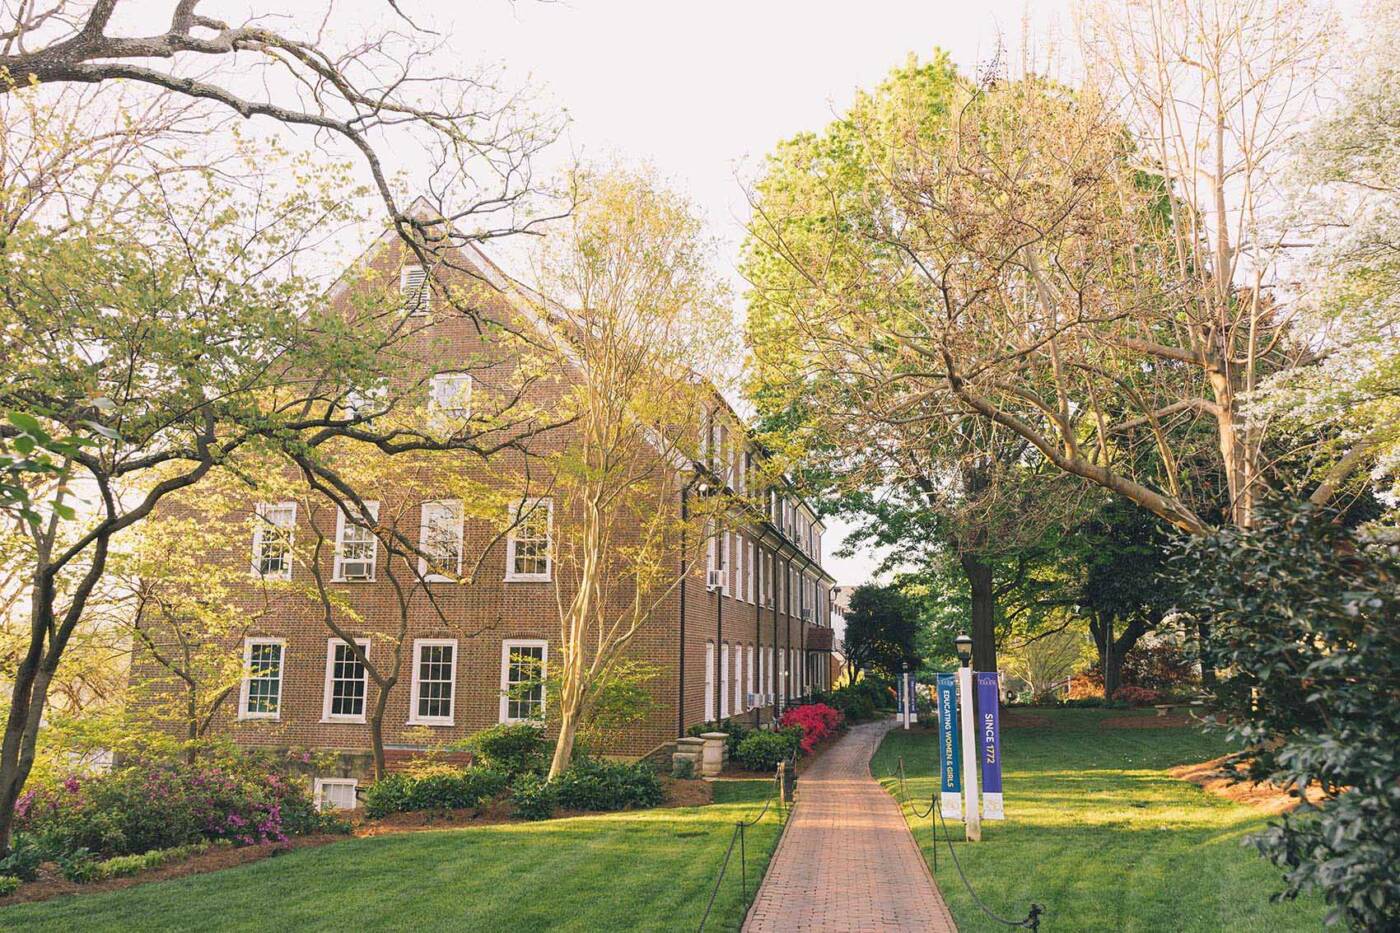 Pathway between building and trees on the Salem campus